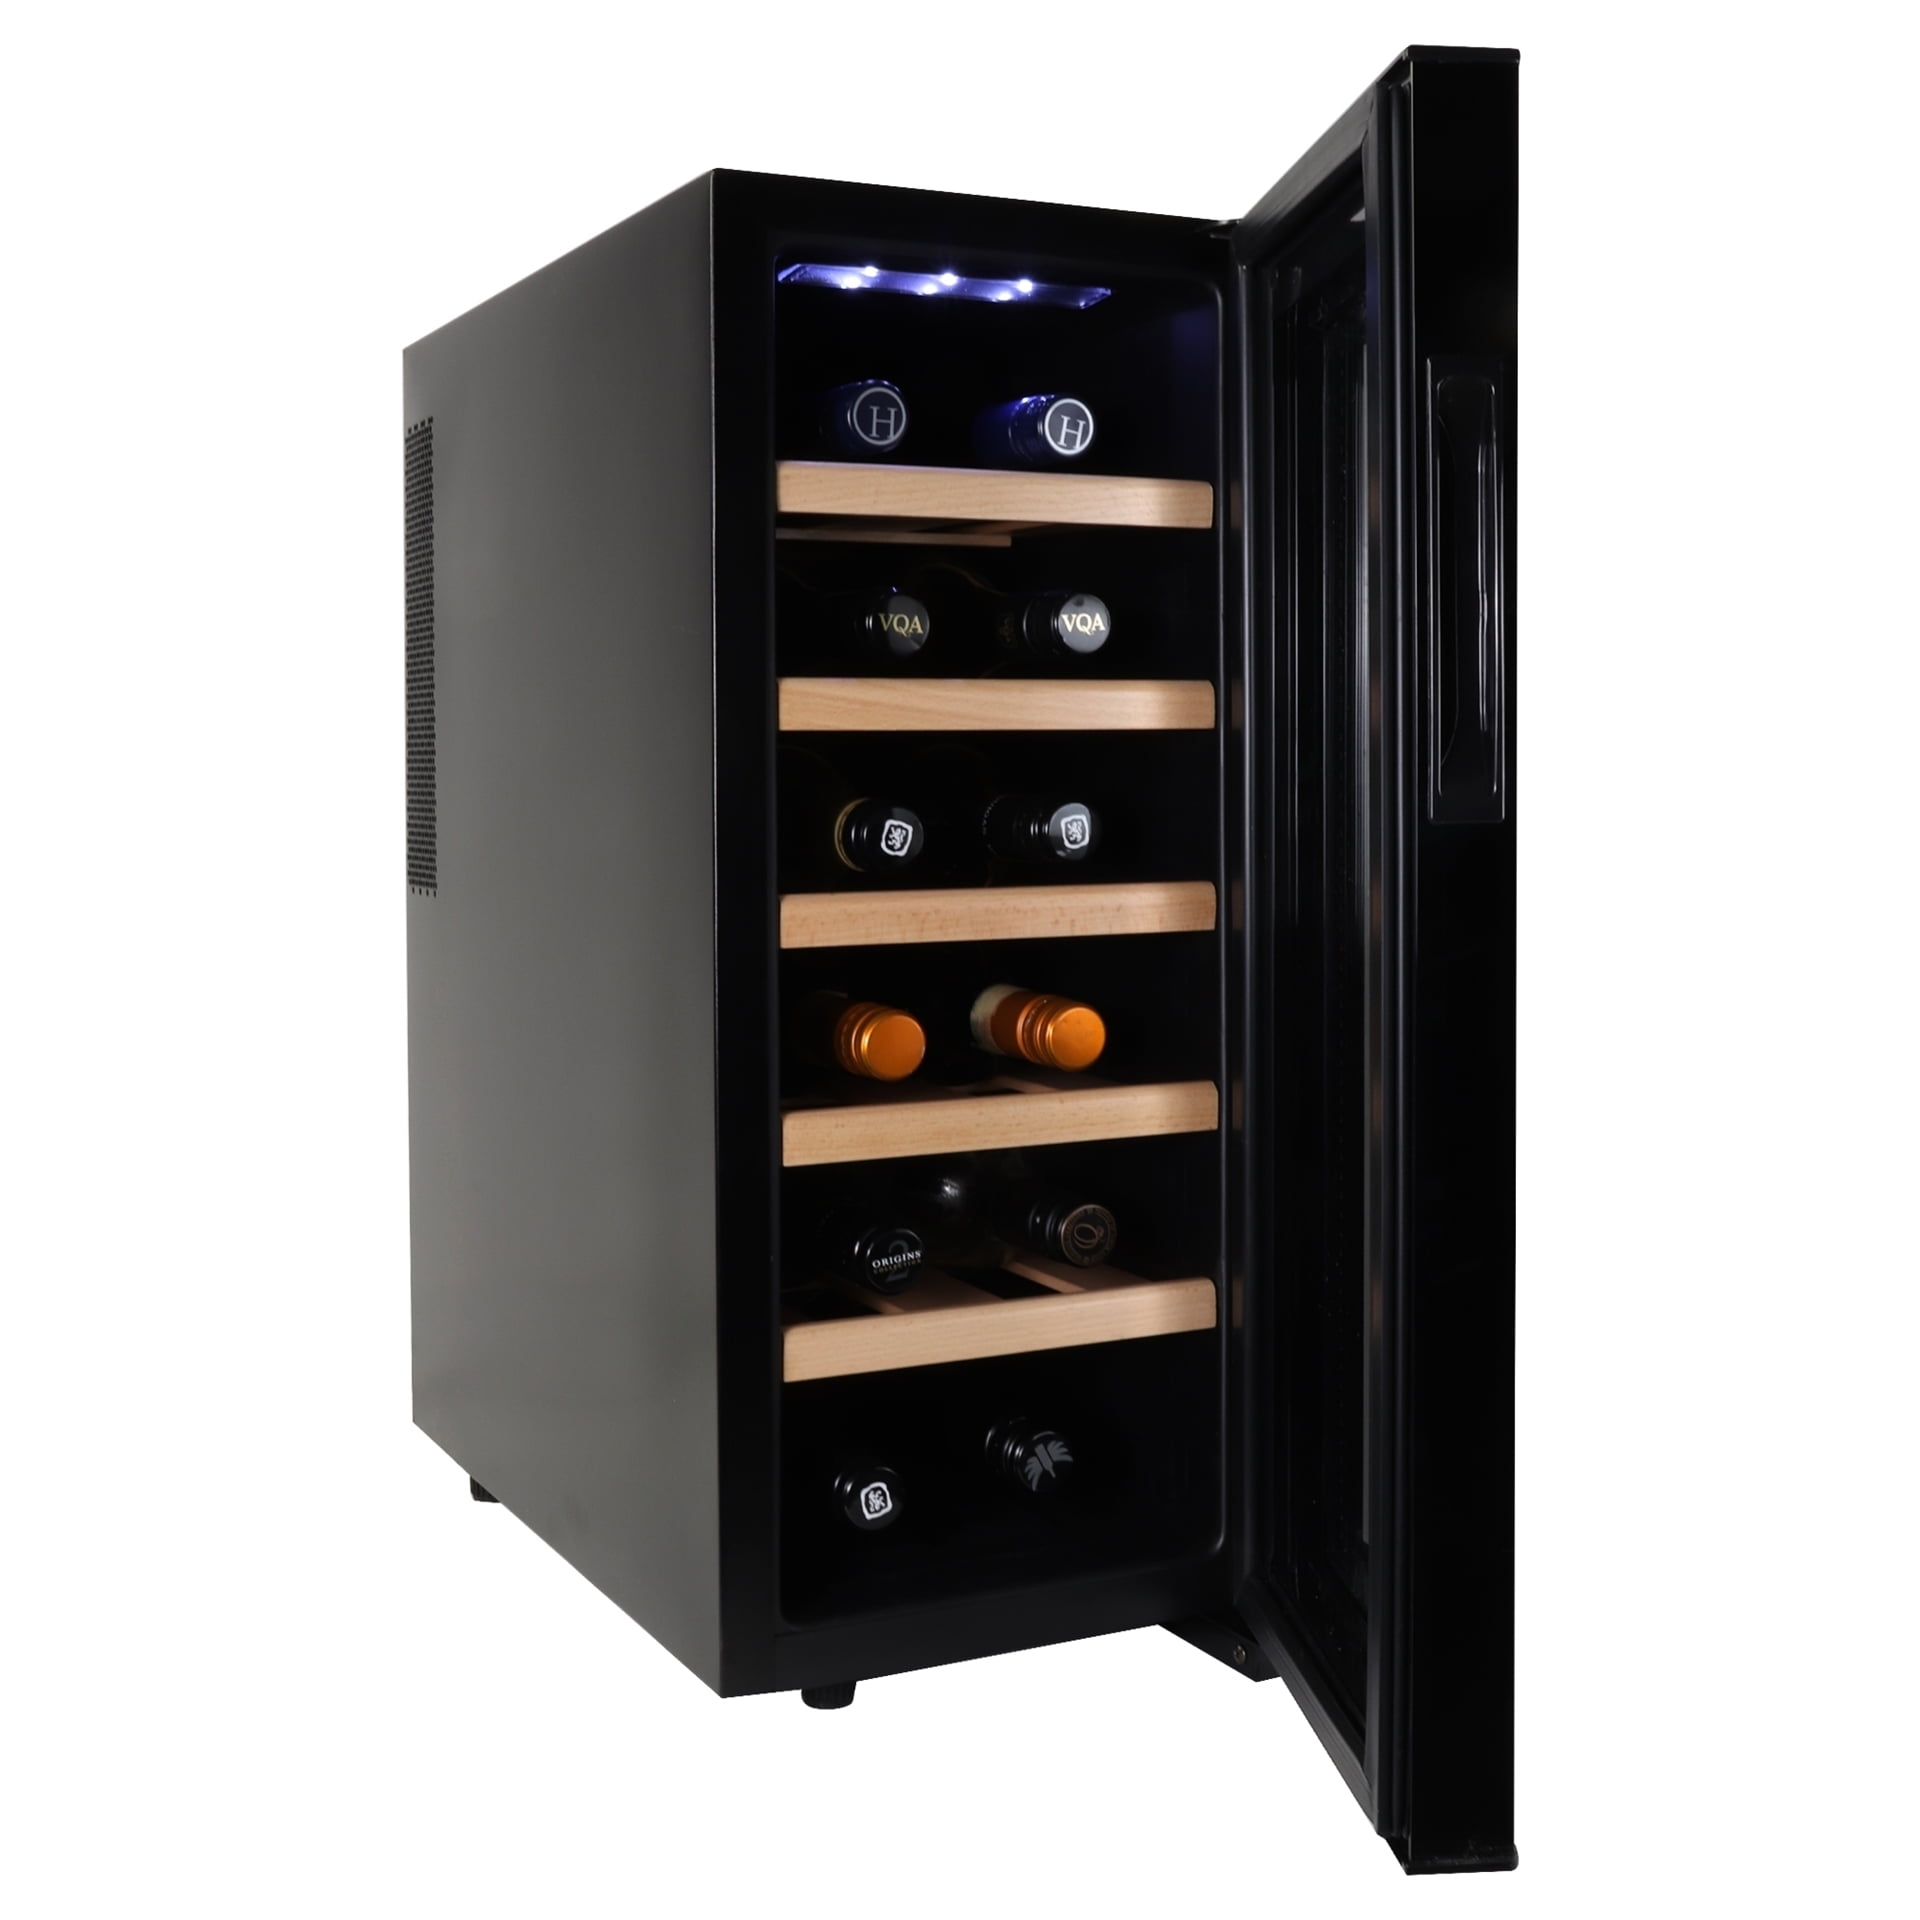 12 Bottles Thermo-electric Wine Cooler 